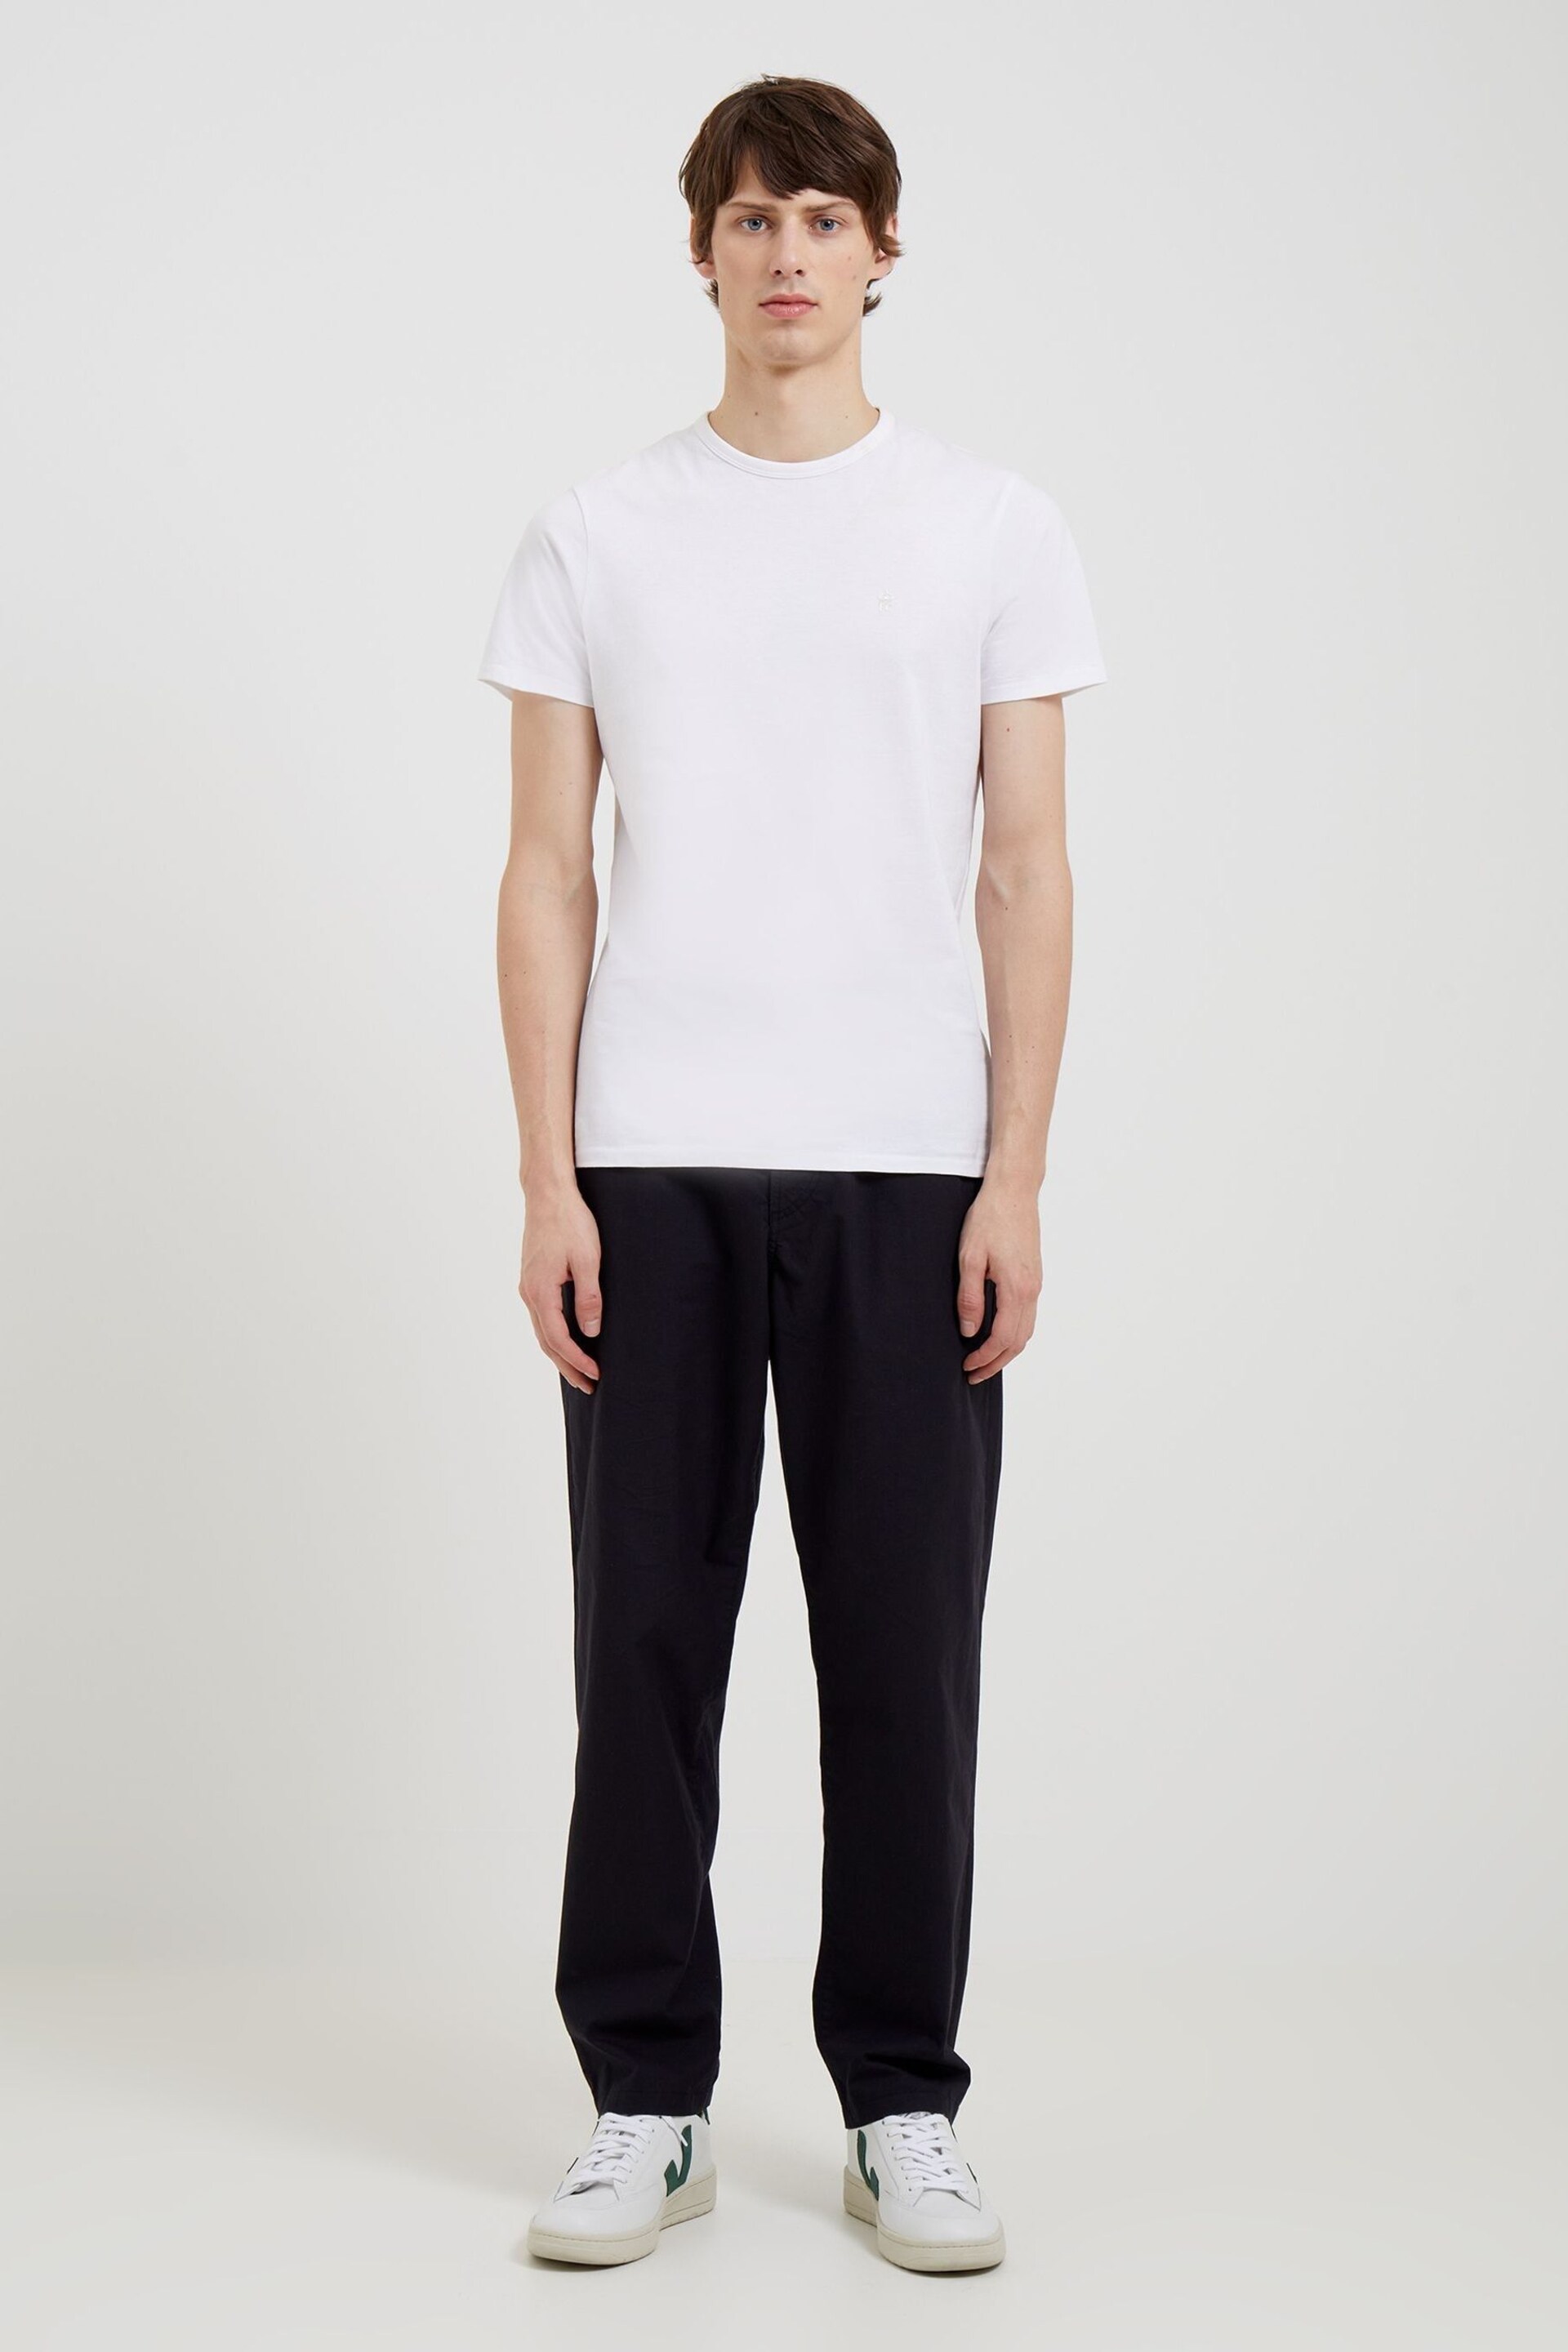 French Connection Black Peached Cotton Straight Leg Trouser - Image 1 of 3